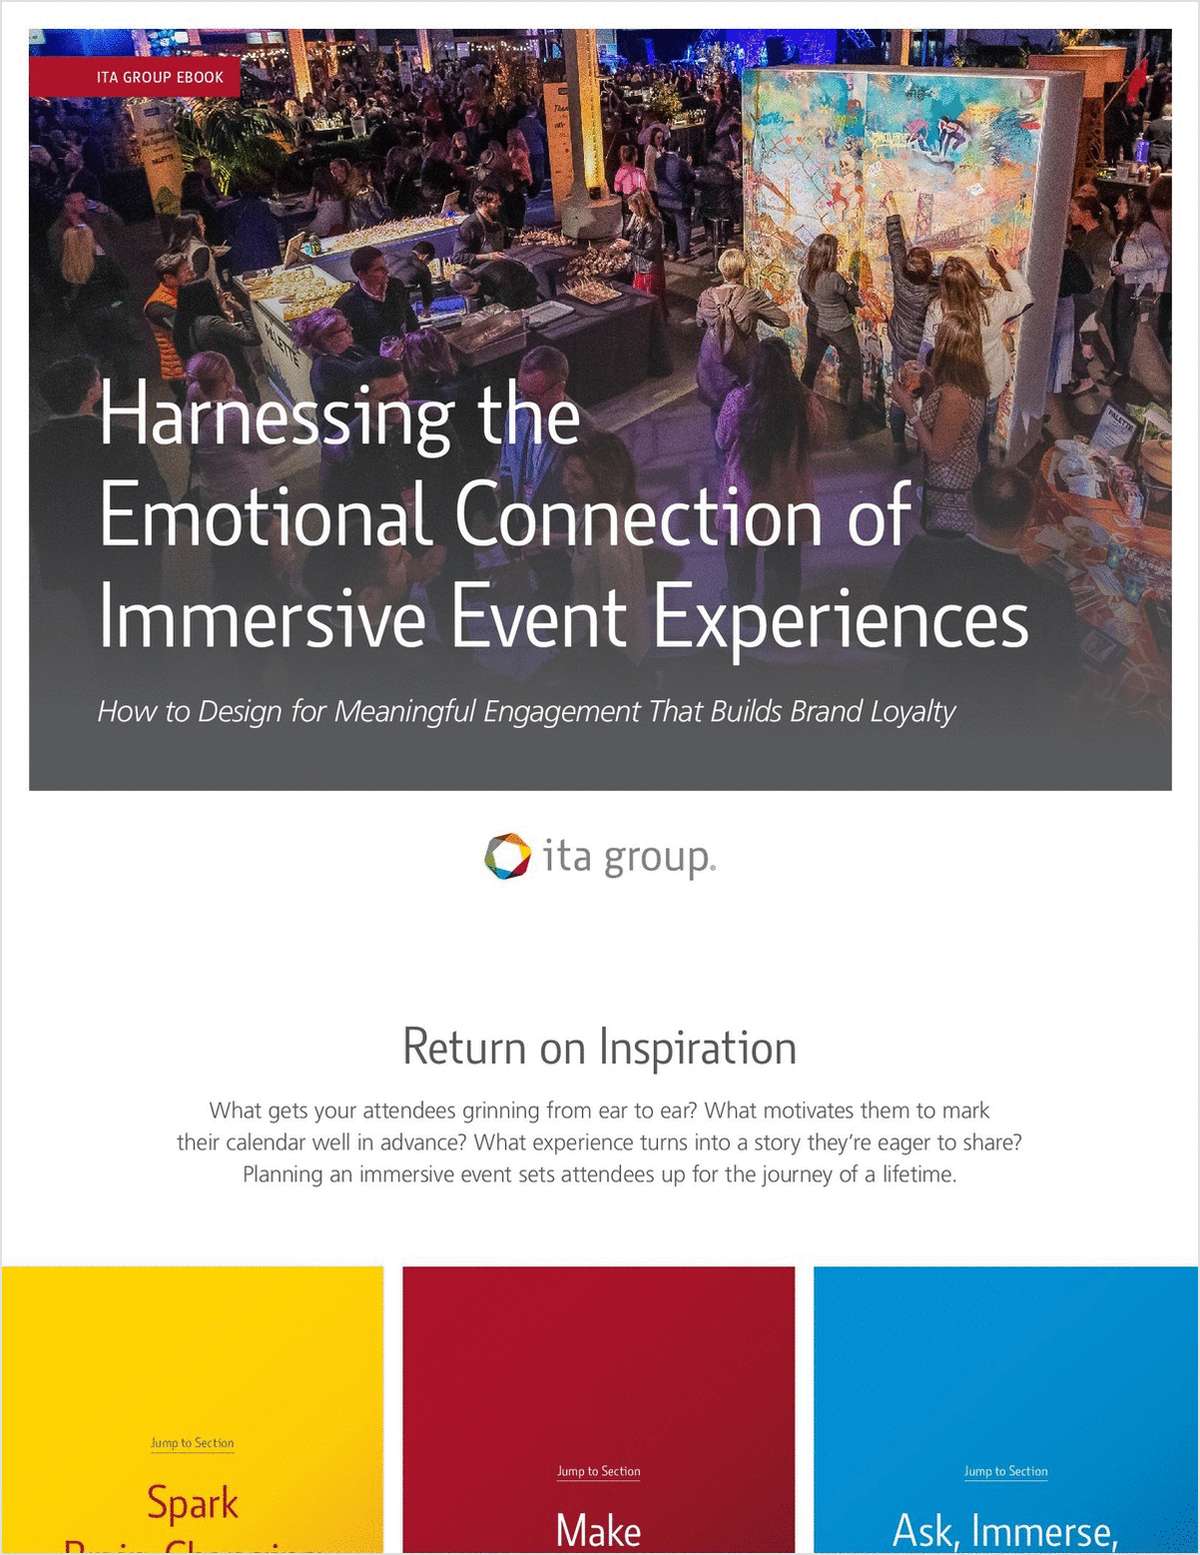 Harnessing the Emotional Connection of Immersive Event Experiences